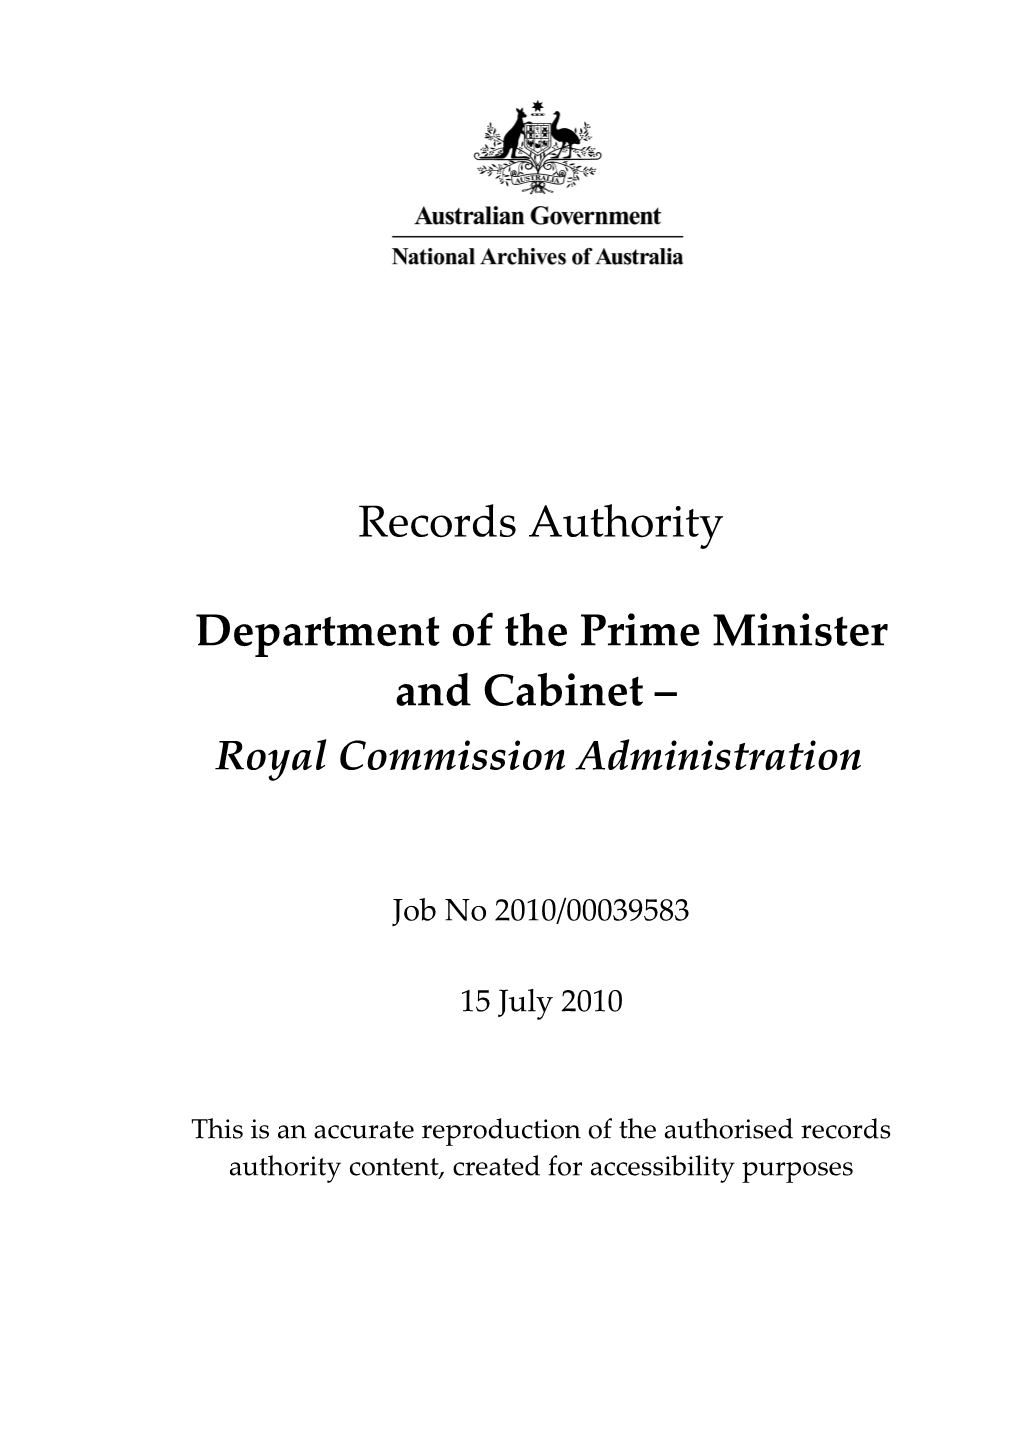 Department of the Prime Minister and Cabinet 2010/00039583